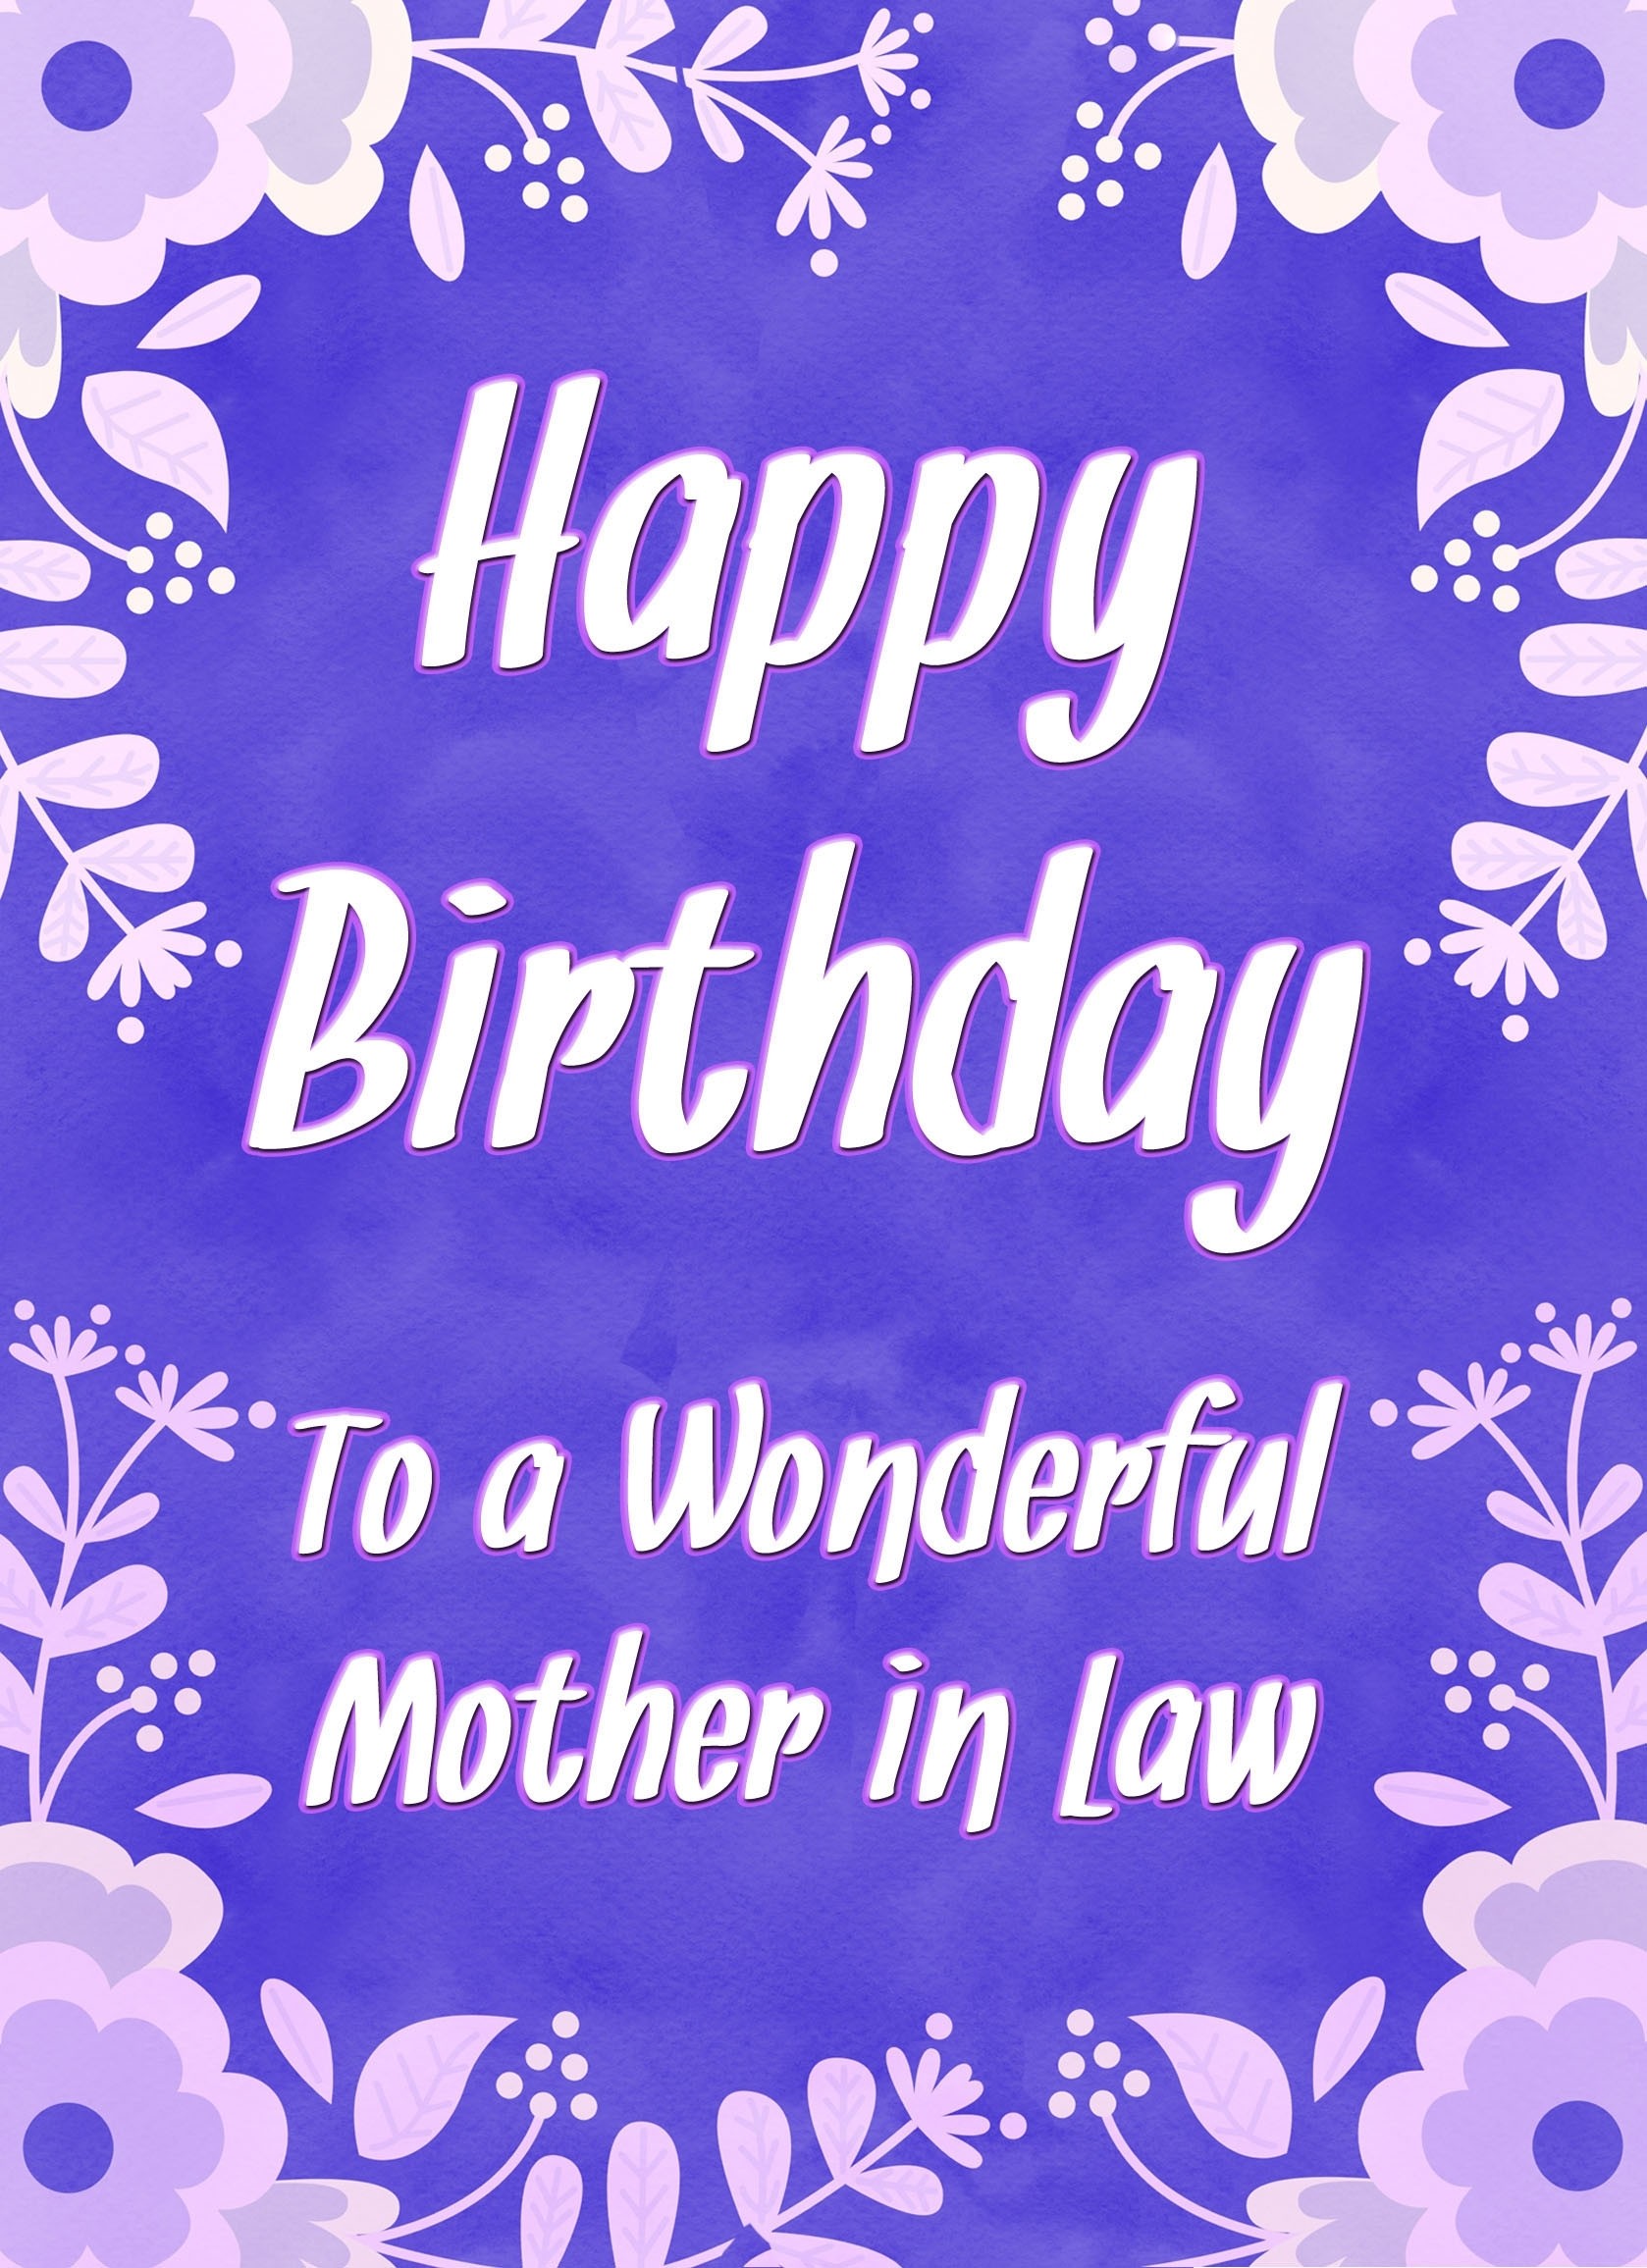 Birthday Card For Wonderful Mother in Law (Purple Border)